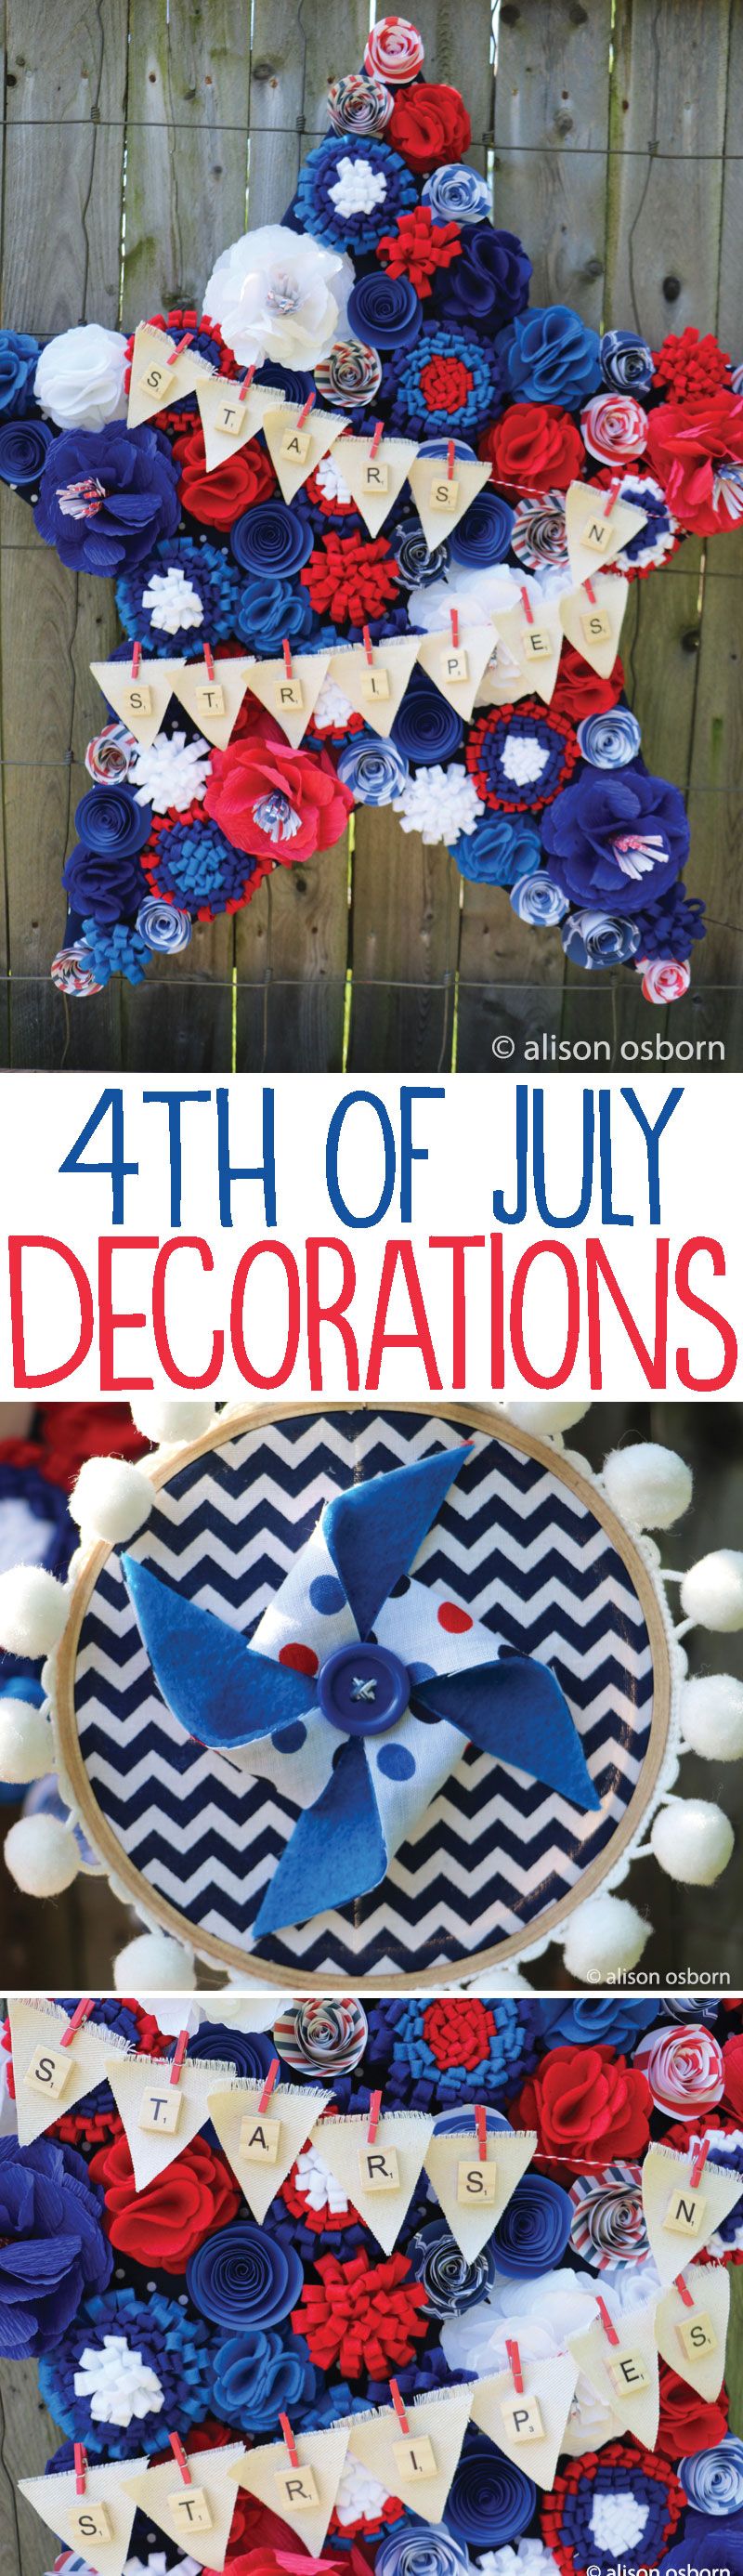 DIY 4th of July Decorations on Love The Day